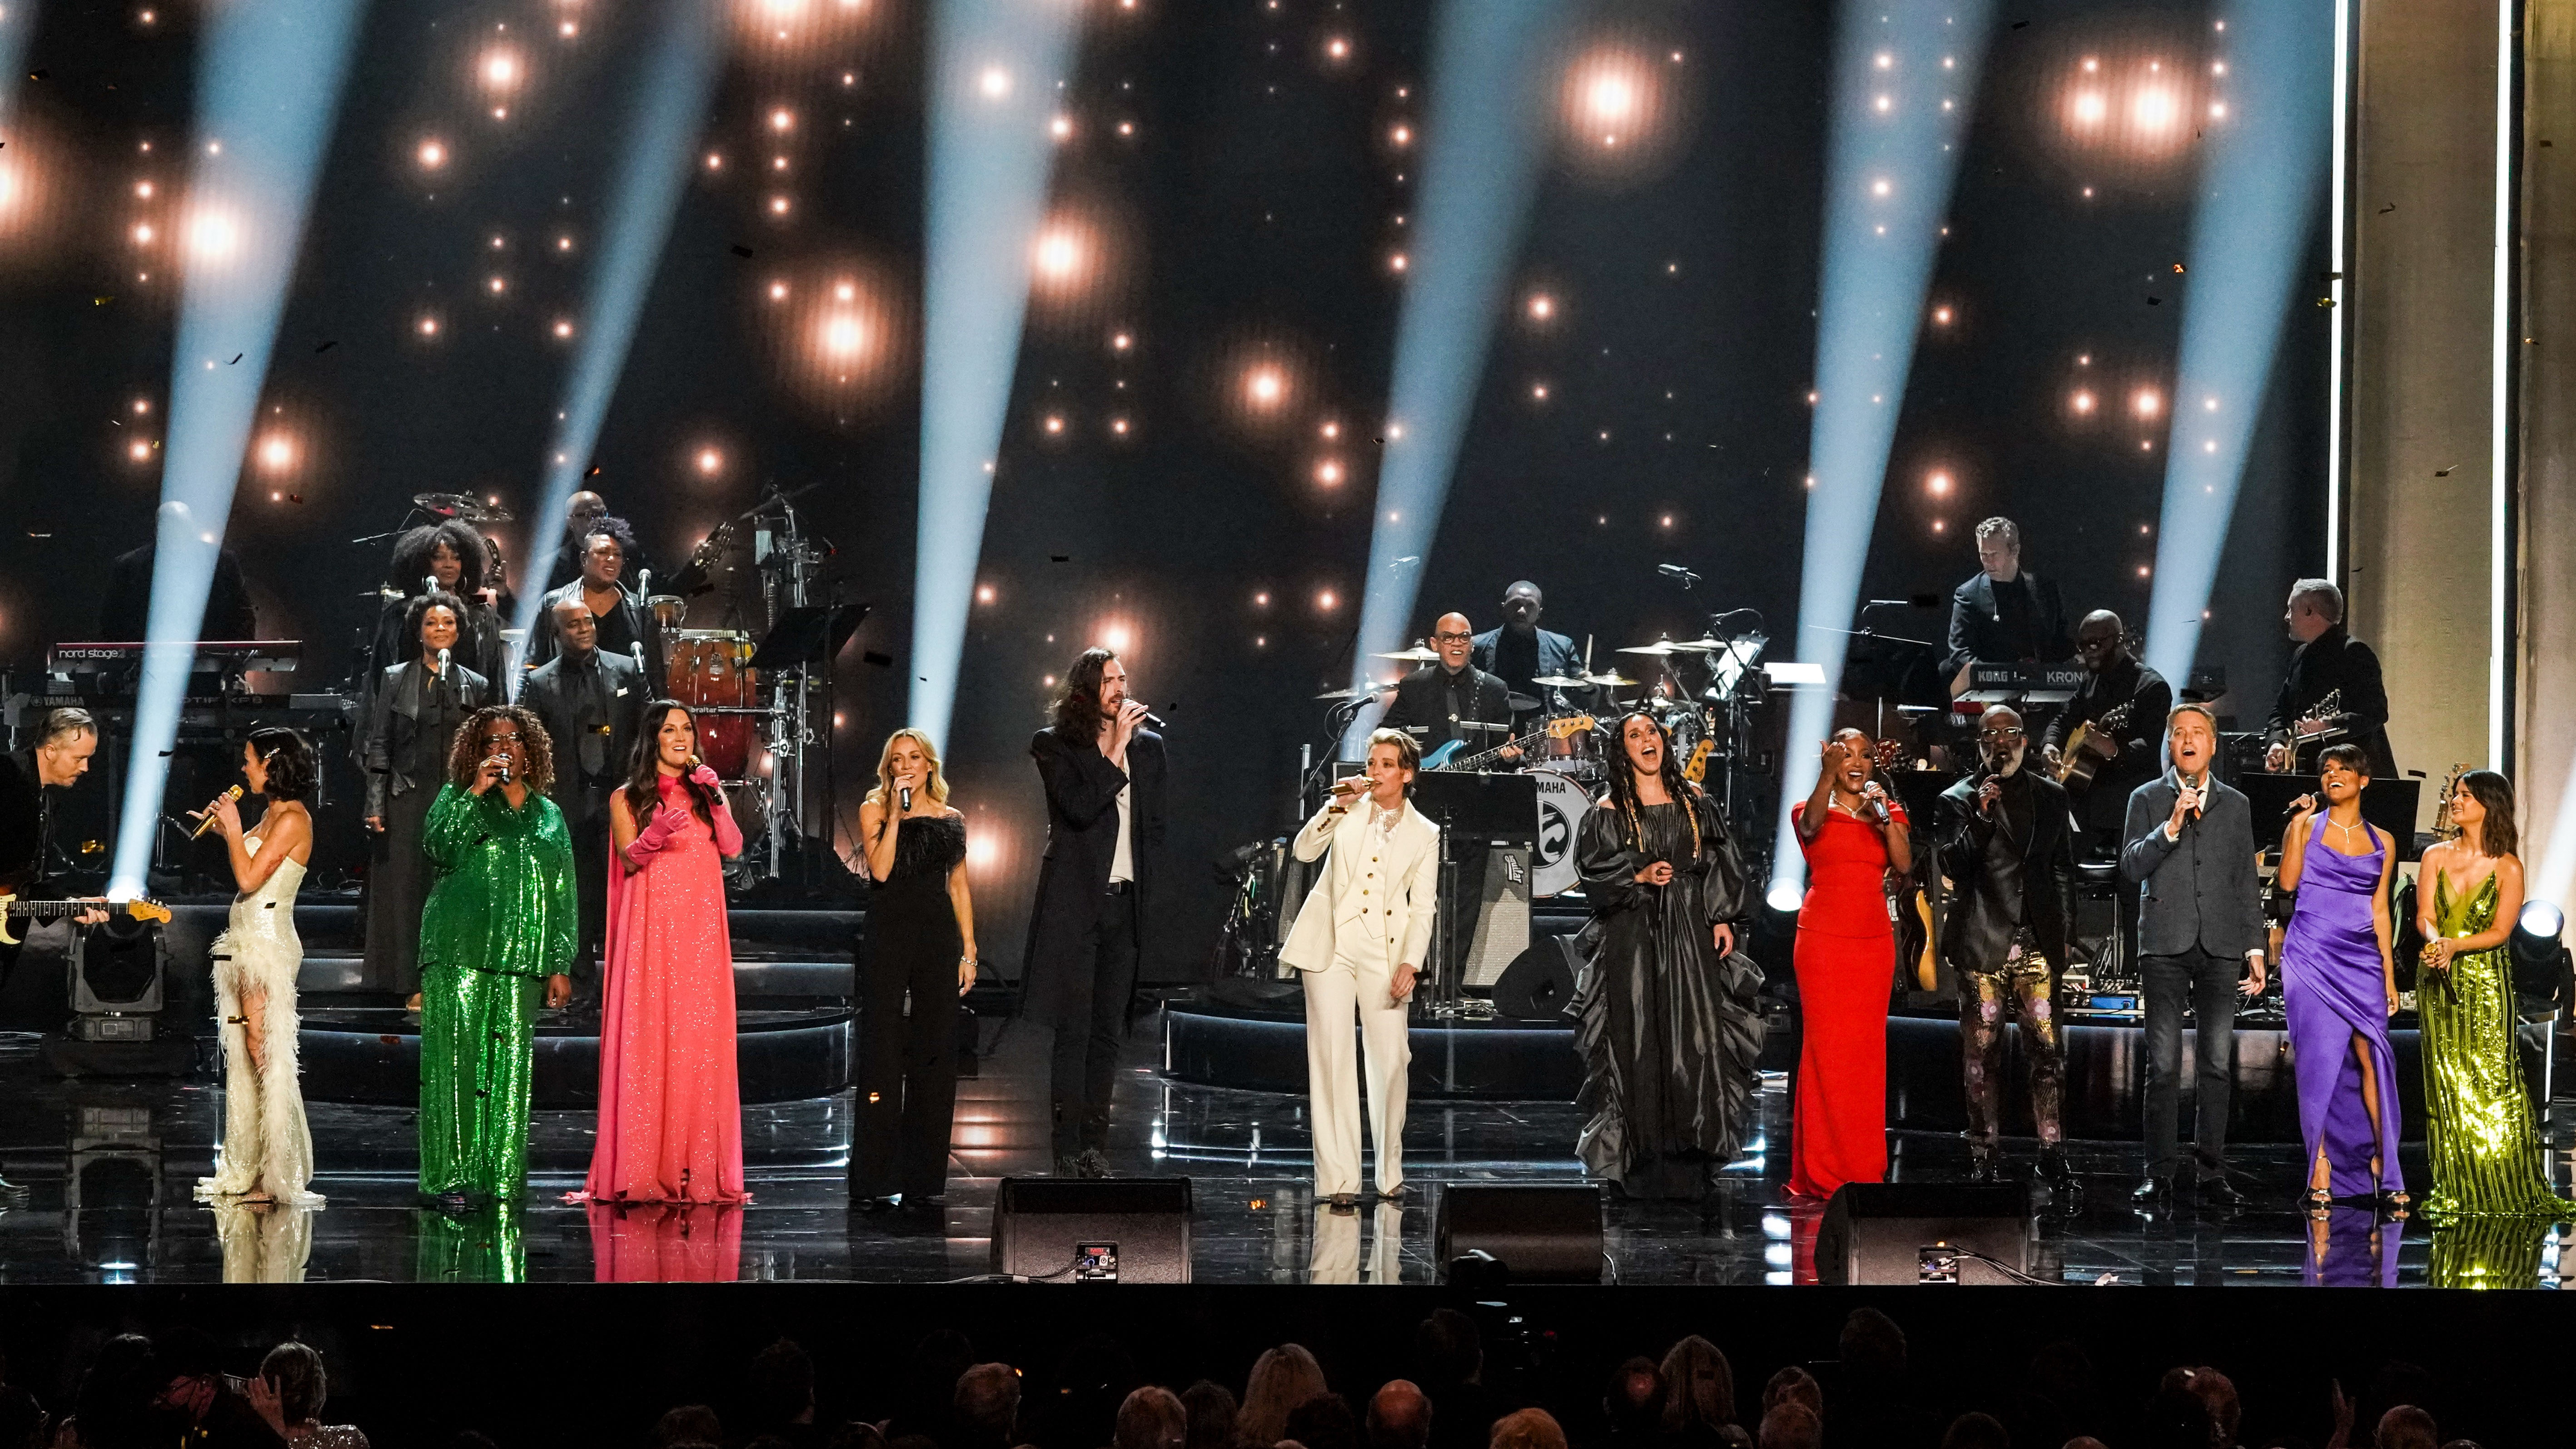 WASHINGTON - DECEMBER 4: Pictured (L-R): Amanda Shires, Diane Reeves, Natalie Hemby, Sheryl Crow, Hozier, Brandi Carlile, Jamala, Mickey Guyton, Bebe Winans, Michael W. Smith, Ariana Debose, and Maren Morris appears during THE 45TH ANNUAL KENNEDY CENTER HONORS, broadcasting on Wednesday, Dec. 28 (8:00-10:00 PM, ET/PT) on the CBS Television Network and stream live and on demand on Paramount+. 